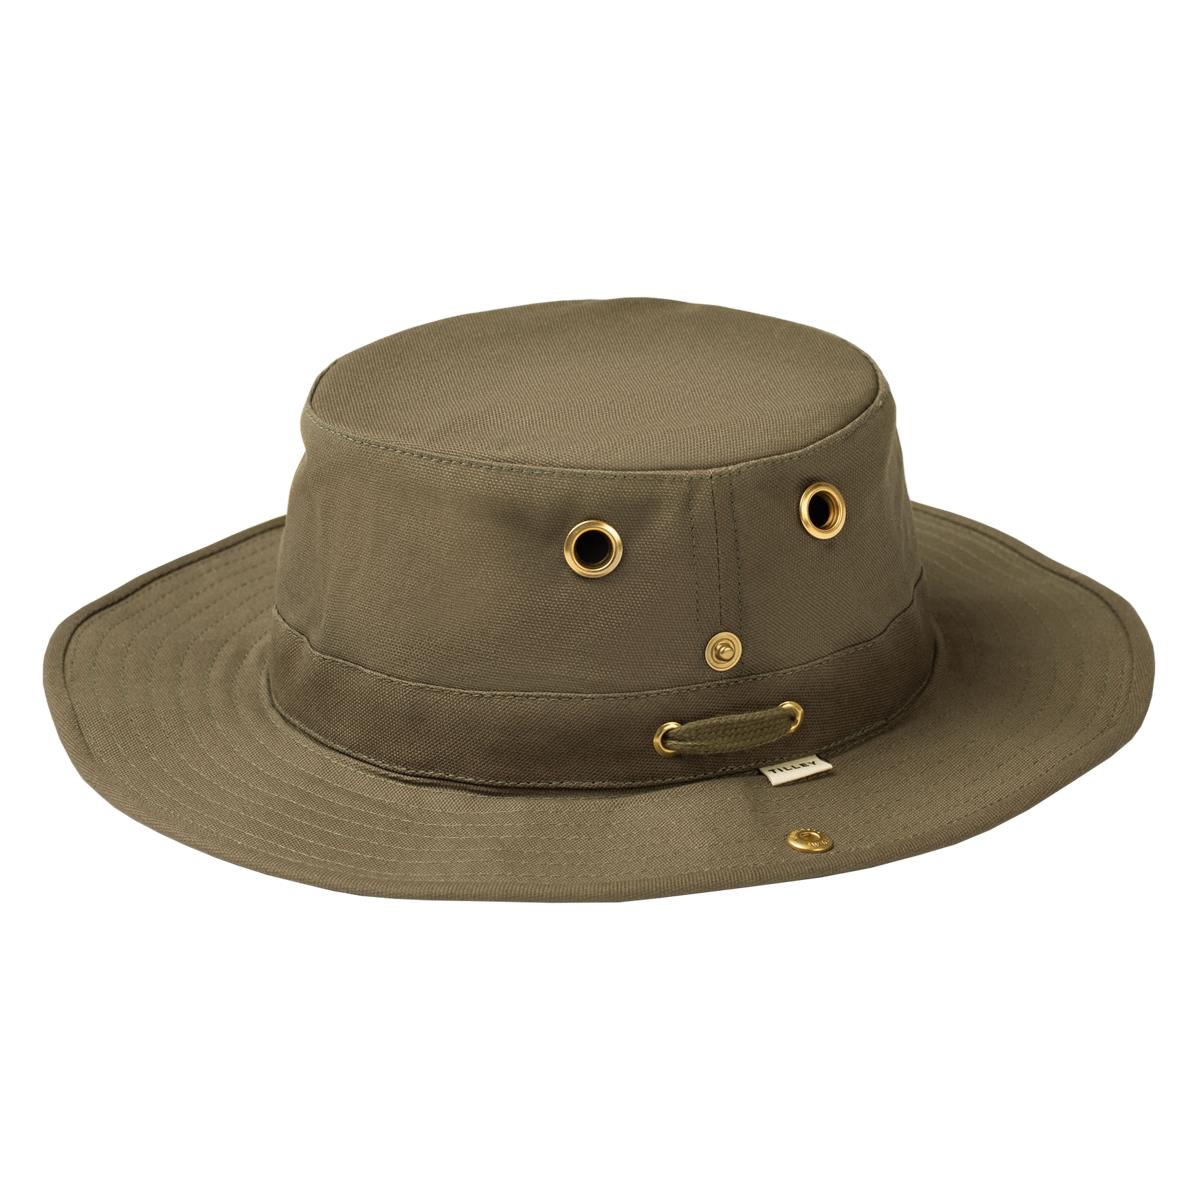 What is the best way to wash the Tilley hemp hat?